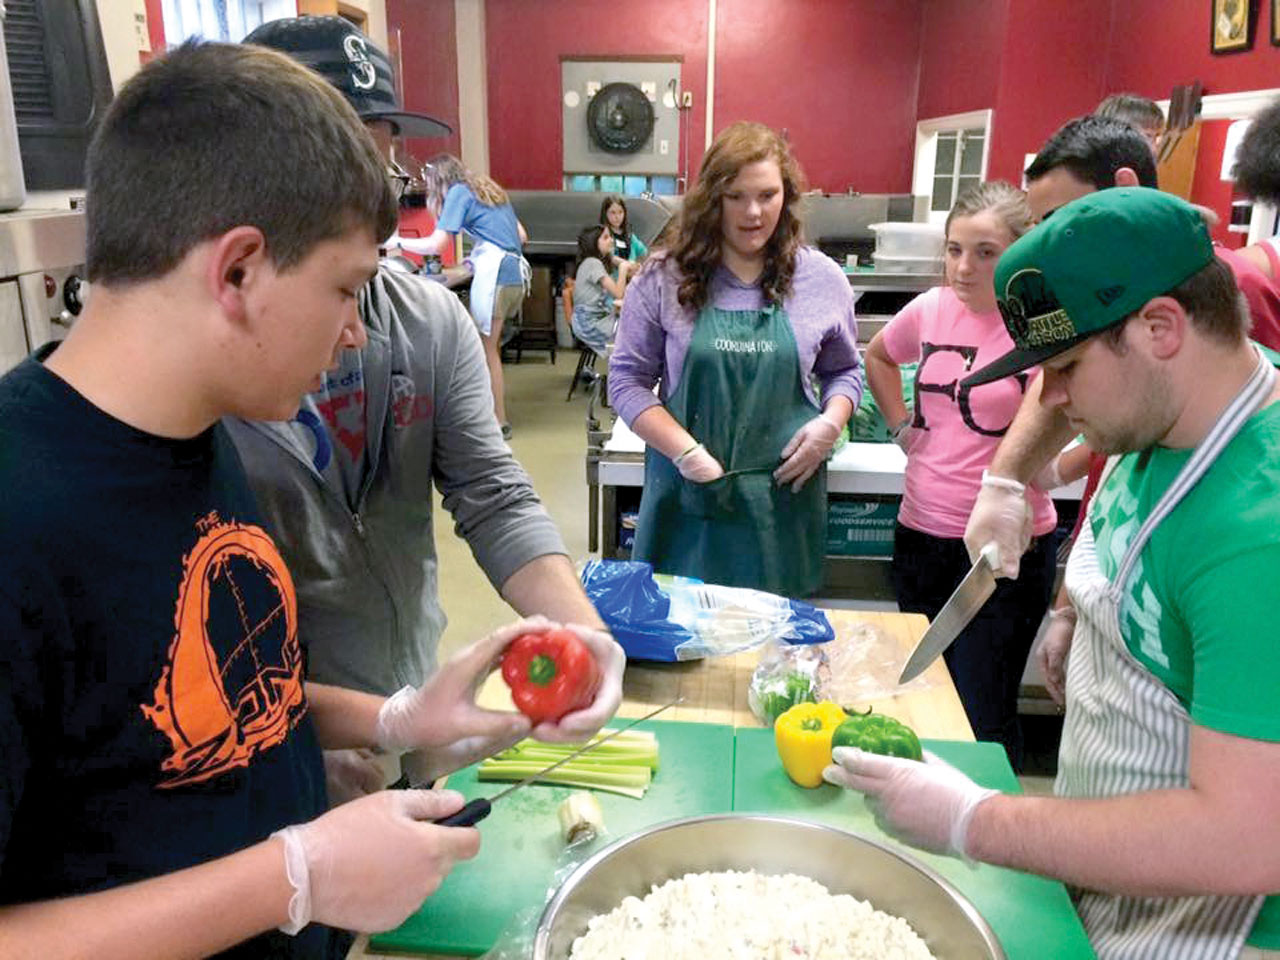 Portland team helps church prepare a meal for people in need (Photo: Provided)